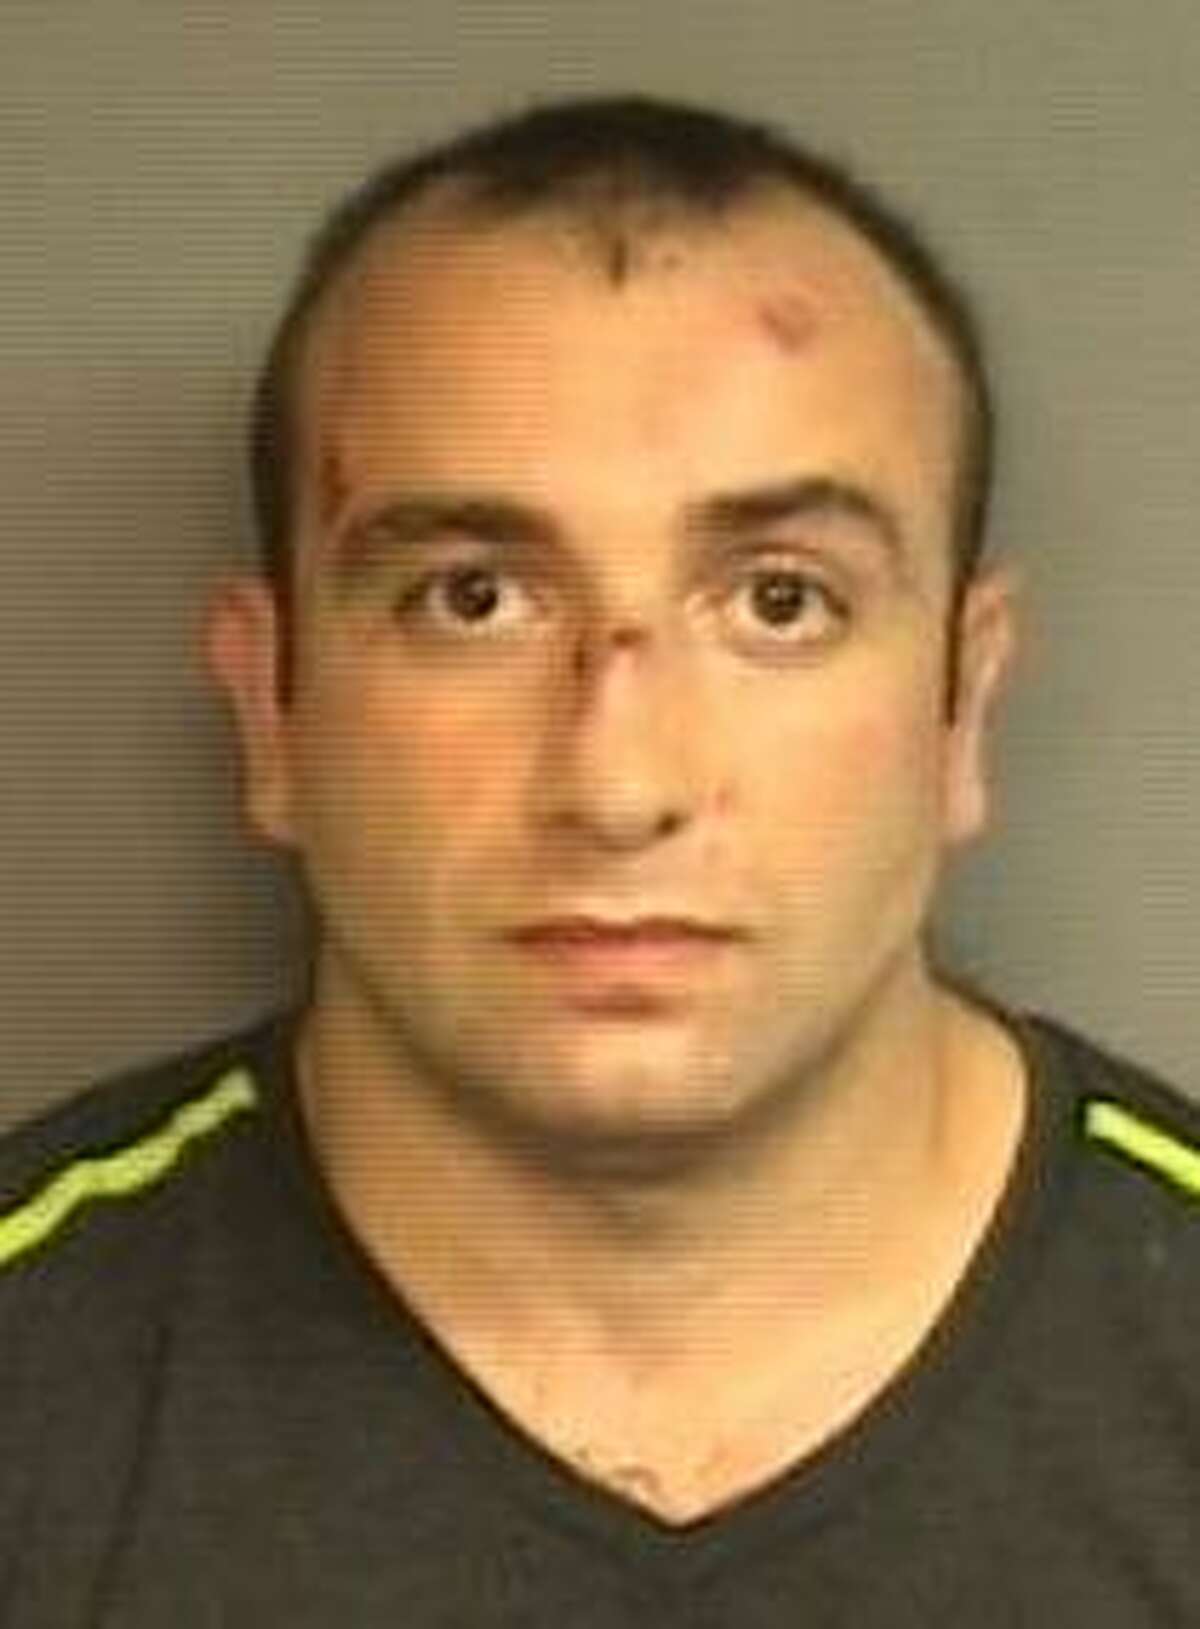 Shota Mekoshvili, 29, is charged with first-degree murder in the stabbing death of taxi cab driver Mahomed Kamal, 47, on Wednesday Aug. 27, 2014, in Stamford, Conn.